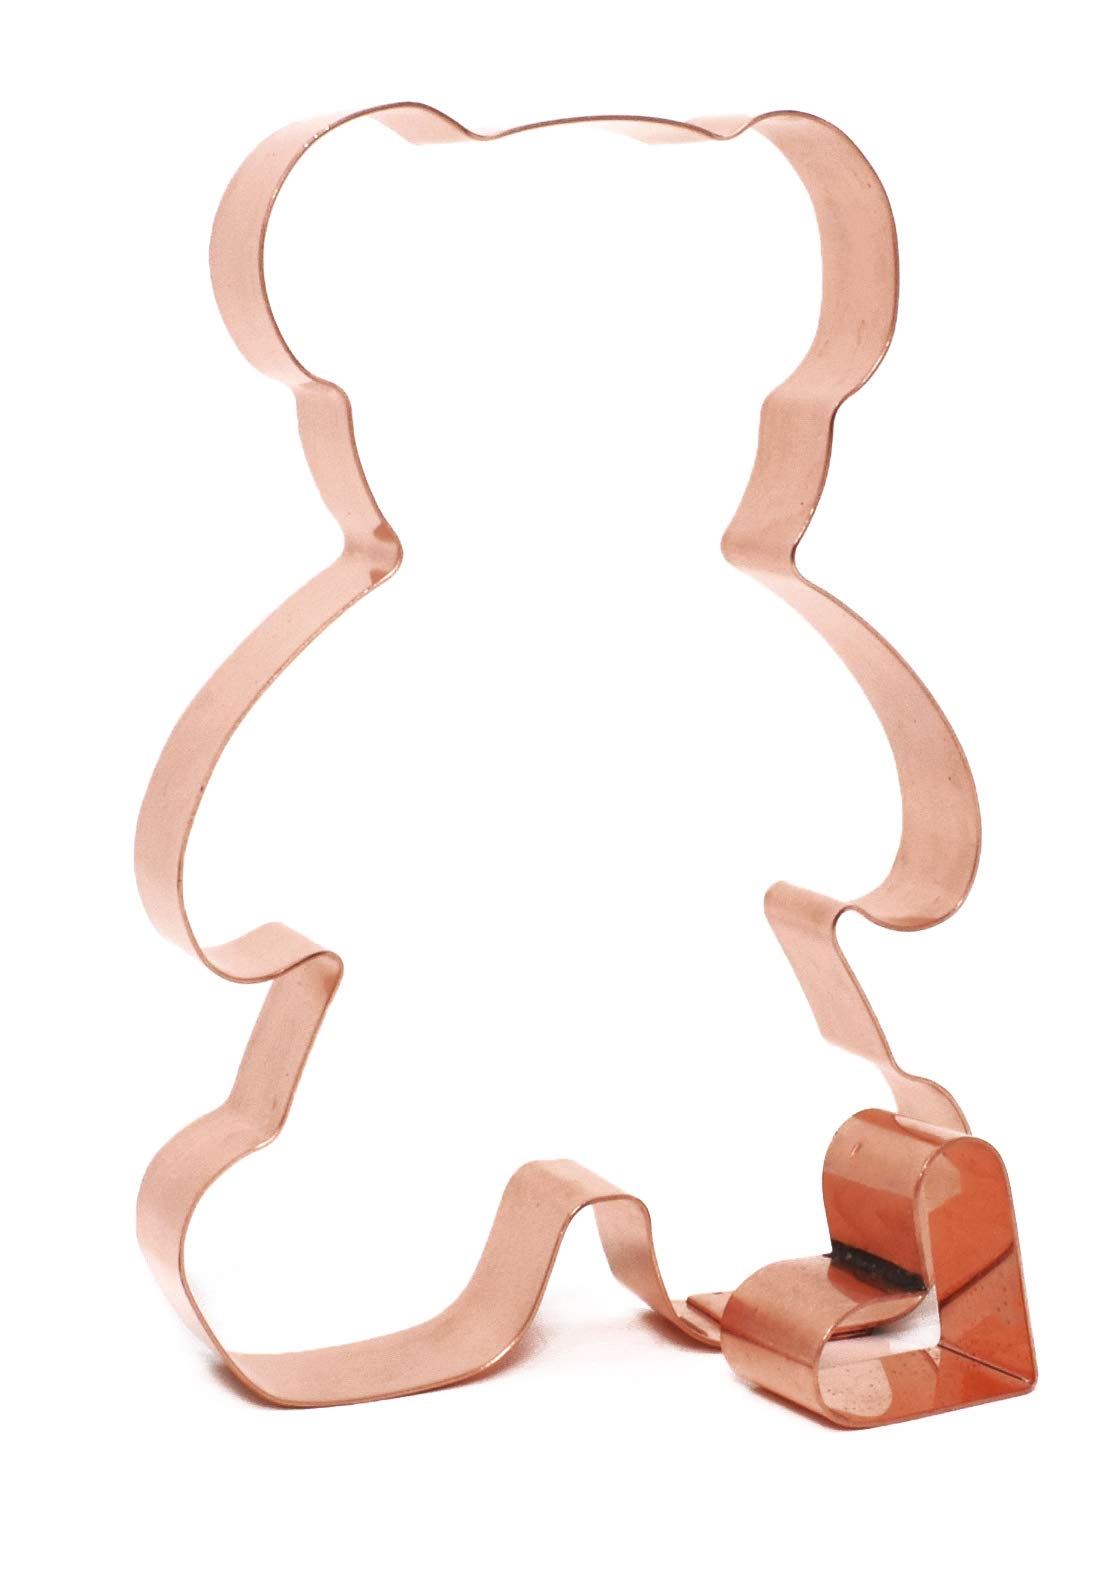 Valentines Day Teddy Bear with Heart Cookie Cutter 3.75 X 5.25 inches - Handcrafted Copper Cookie Cutters by The Fussy Pup